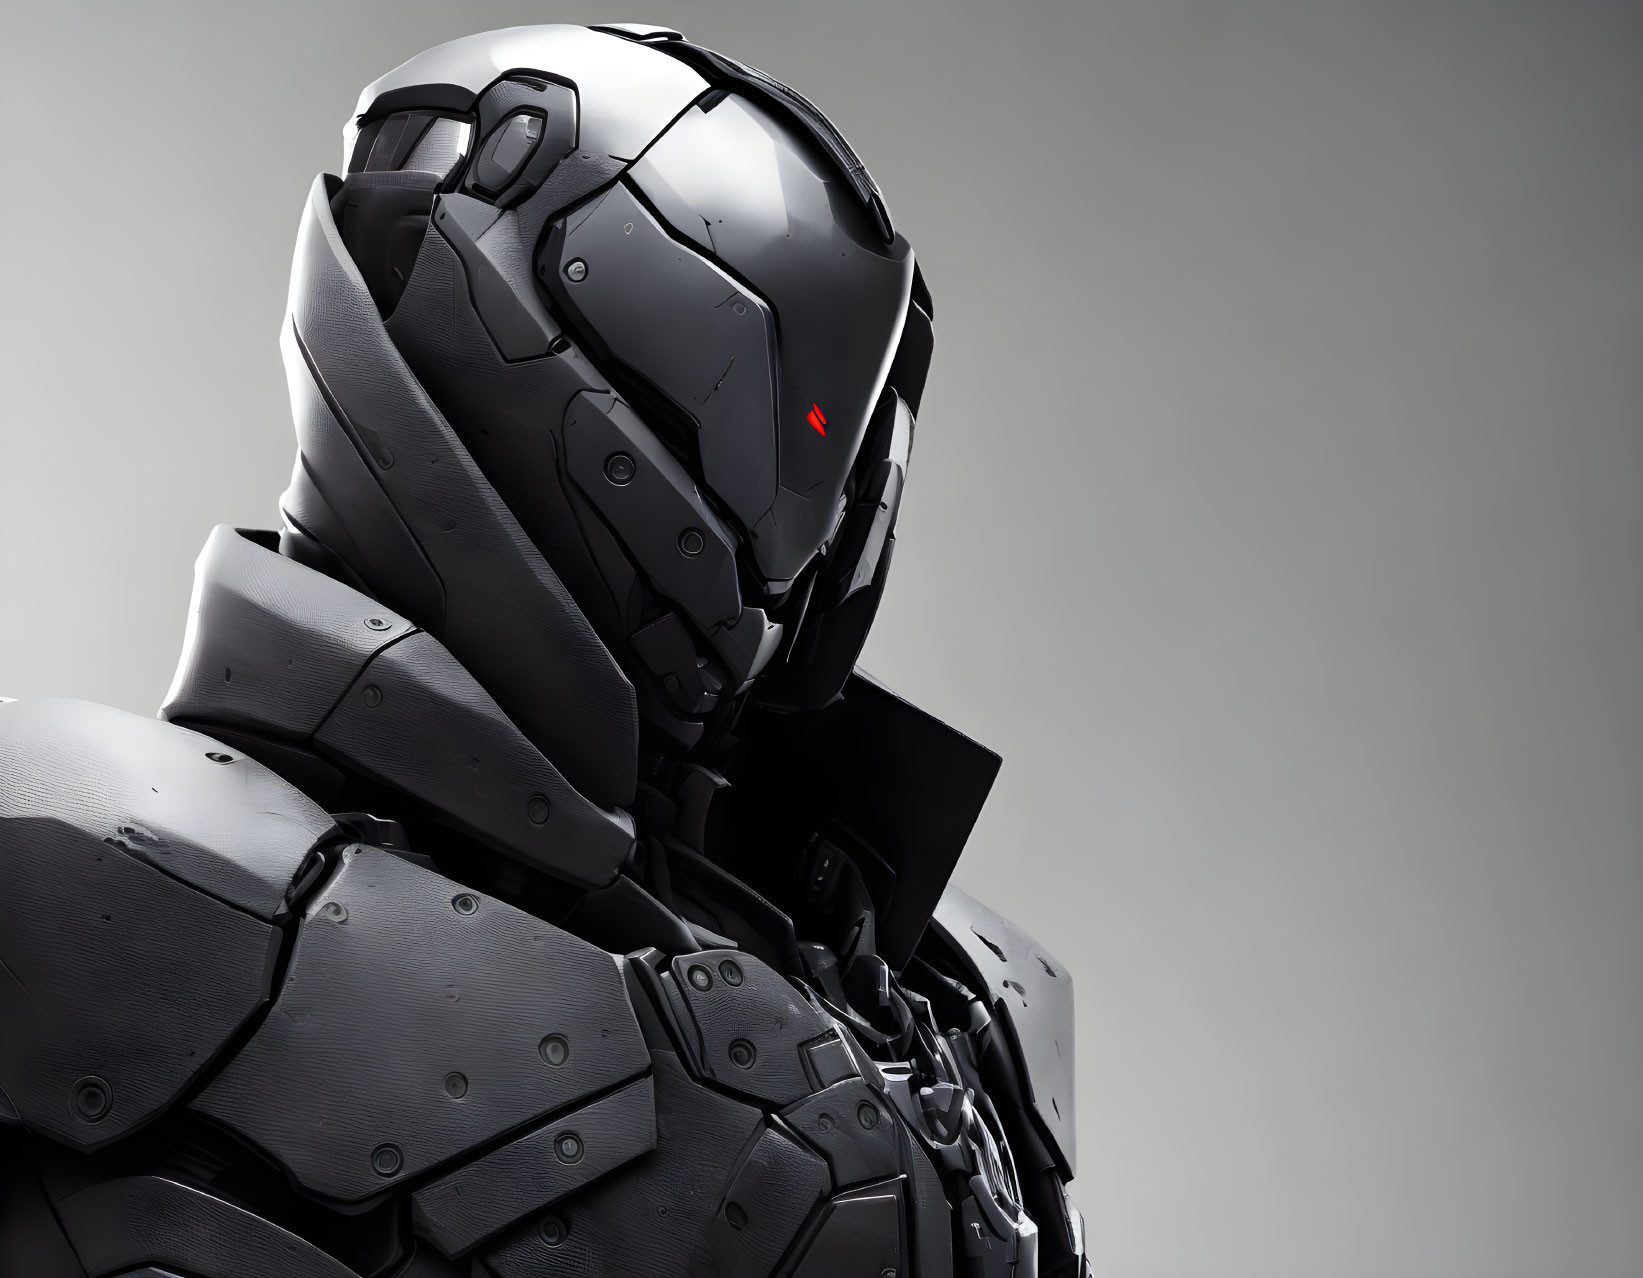 Black futuristic robotic suit with red visor helmet on gray background